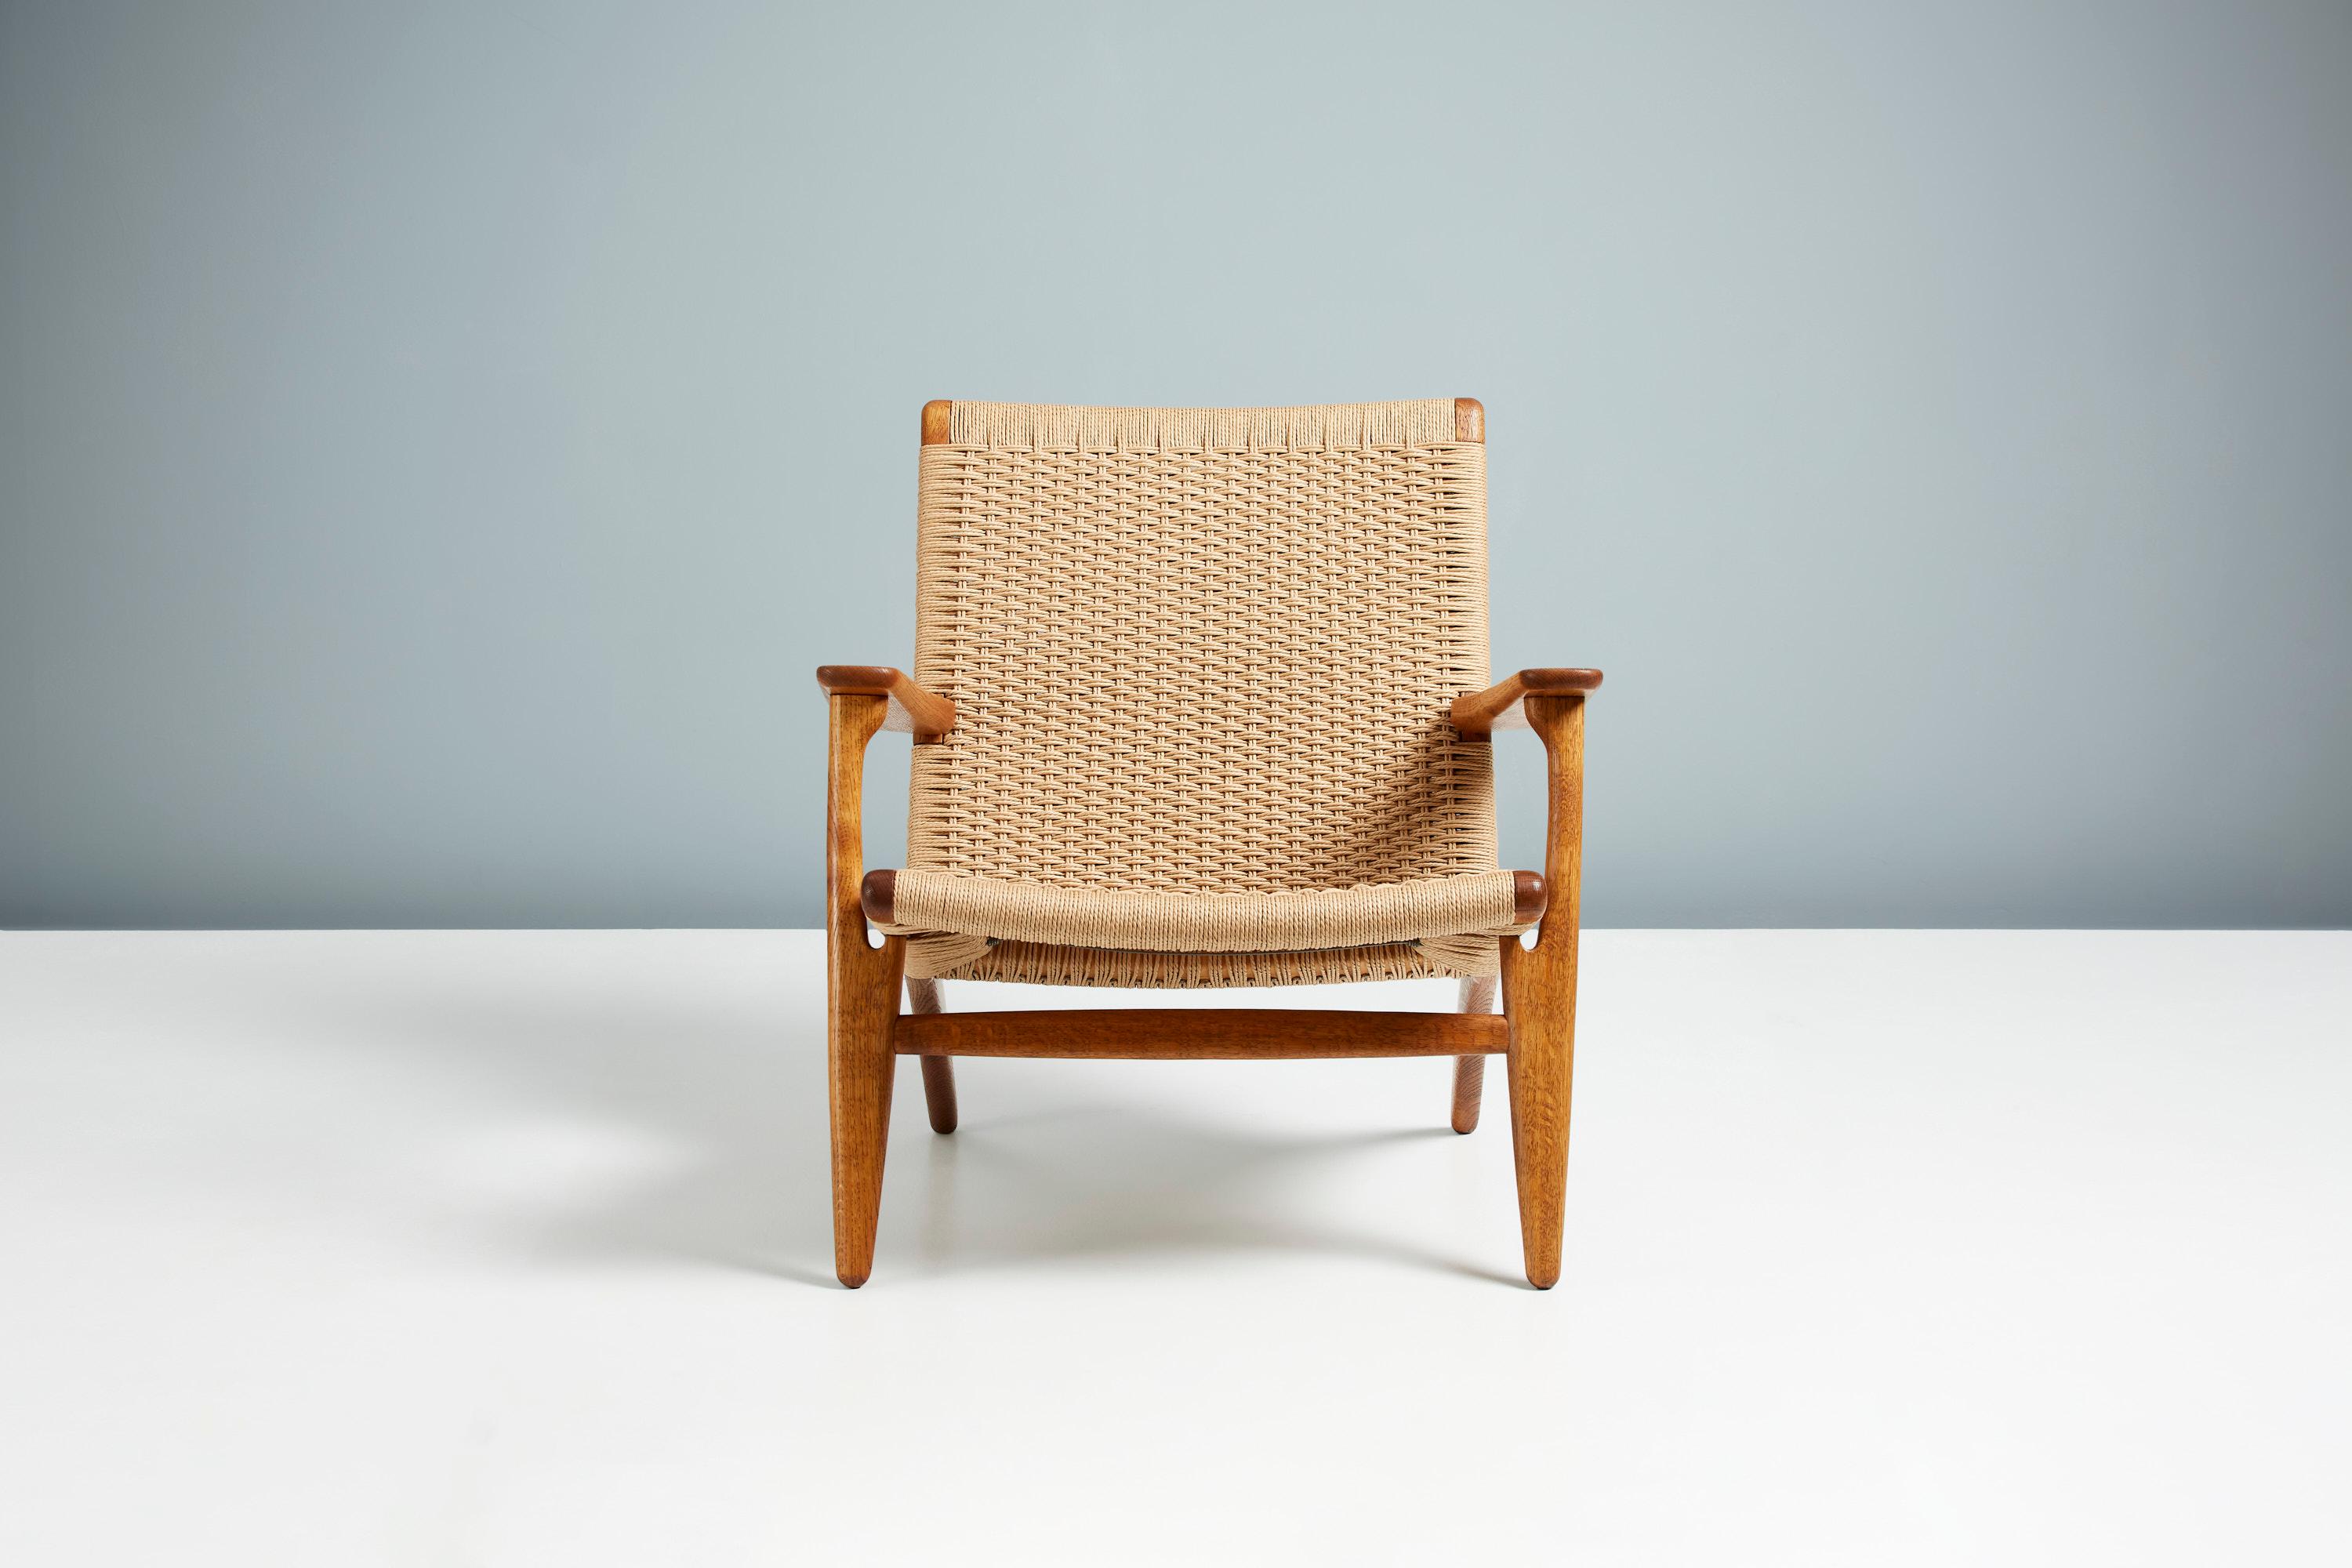 Hans J. Wegner

CH-25 lounge chair, 1950

Produced by Carl Hansen & Son, Copenhagen, Denmark. Oiled, patinated oak frame with new woven paper cord seat and back. 

This is an early example of this iconic design in fantastic condition.